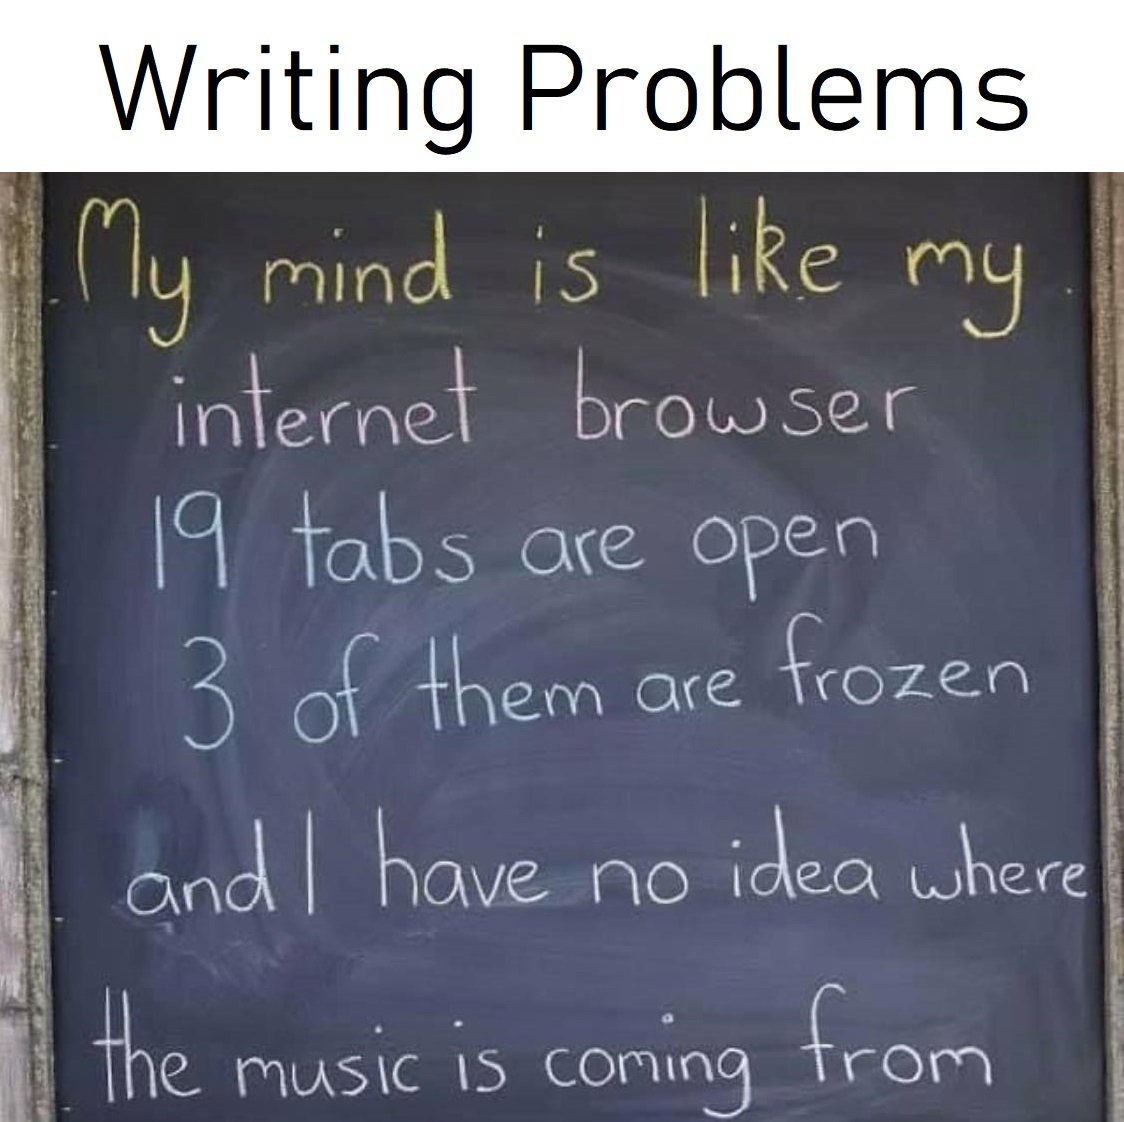 Writing Problems over a picture of a chalkboard that reads: My Mind is like my internet browser: 19 tabs are open, 3 are frozen, and I have no idea where the music is coming from